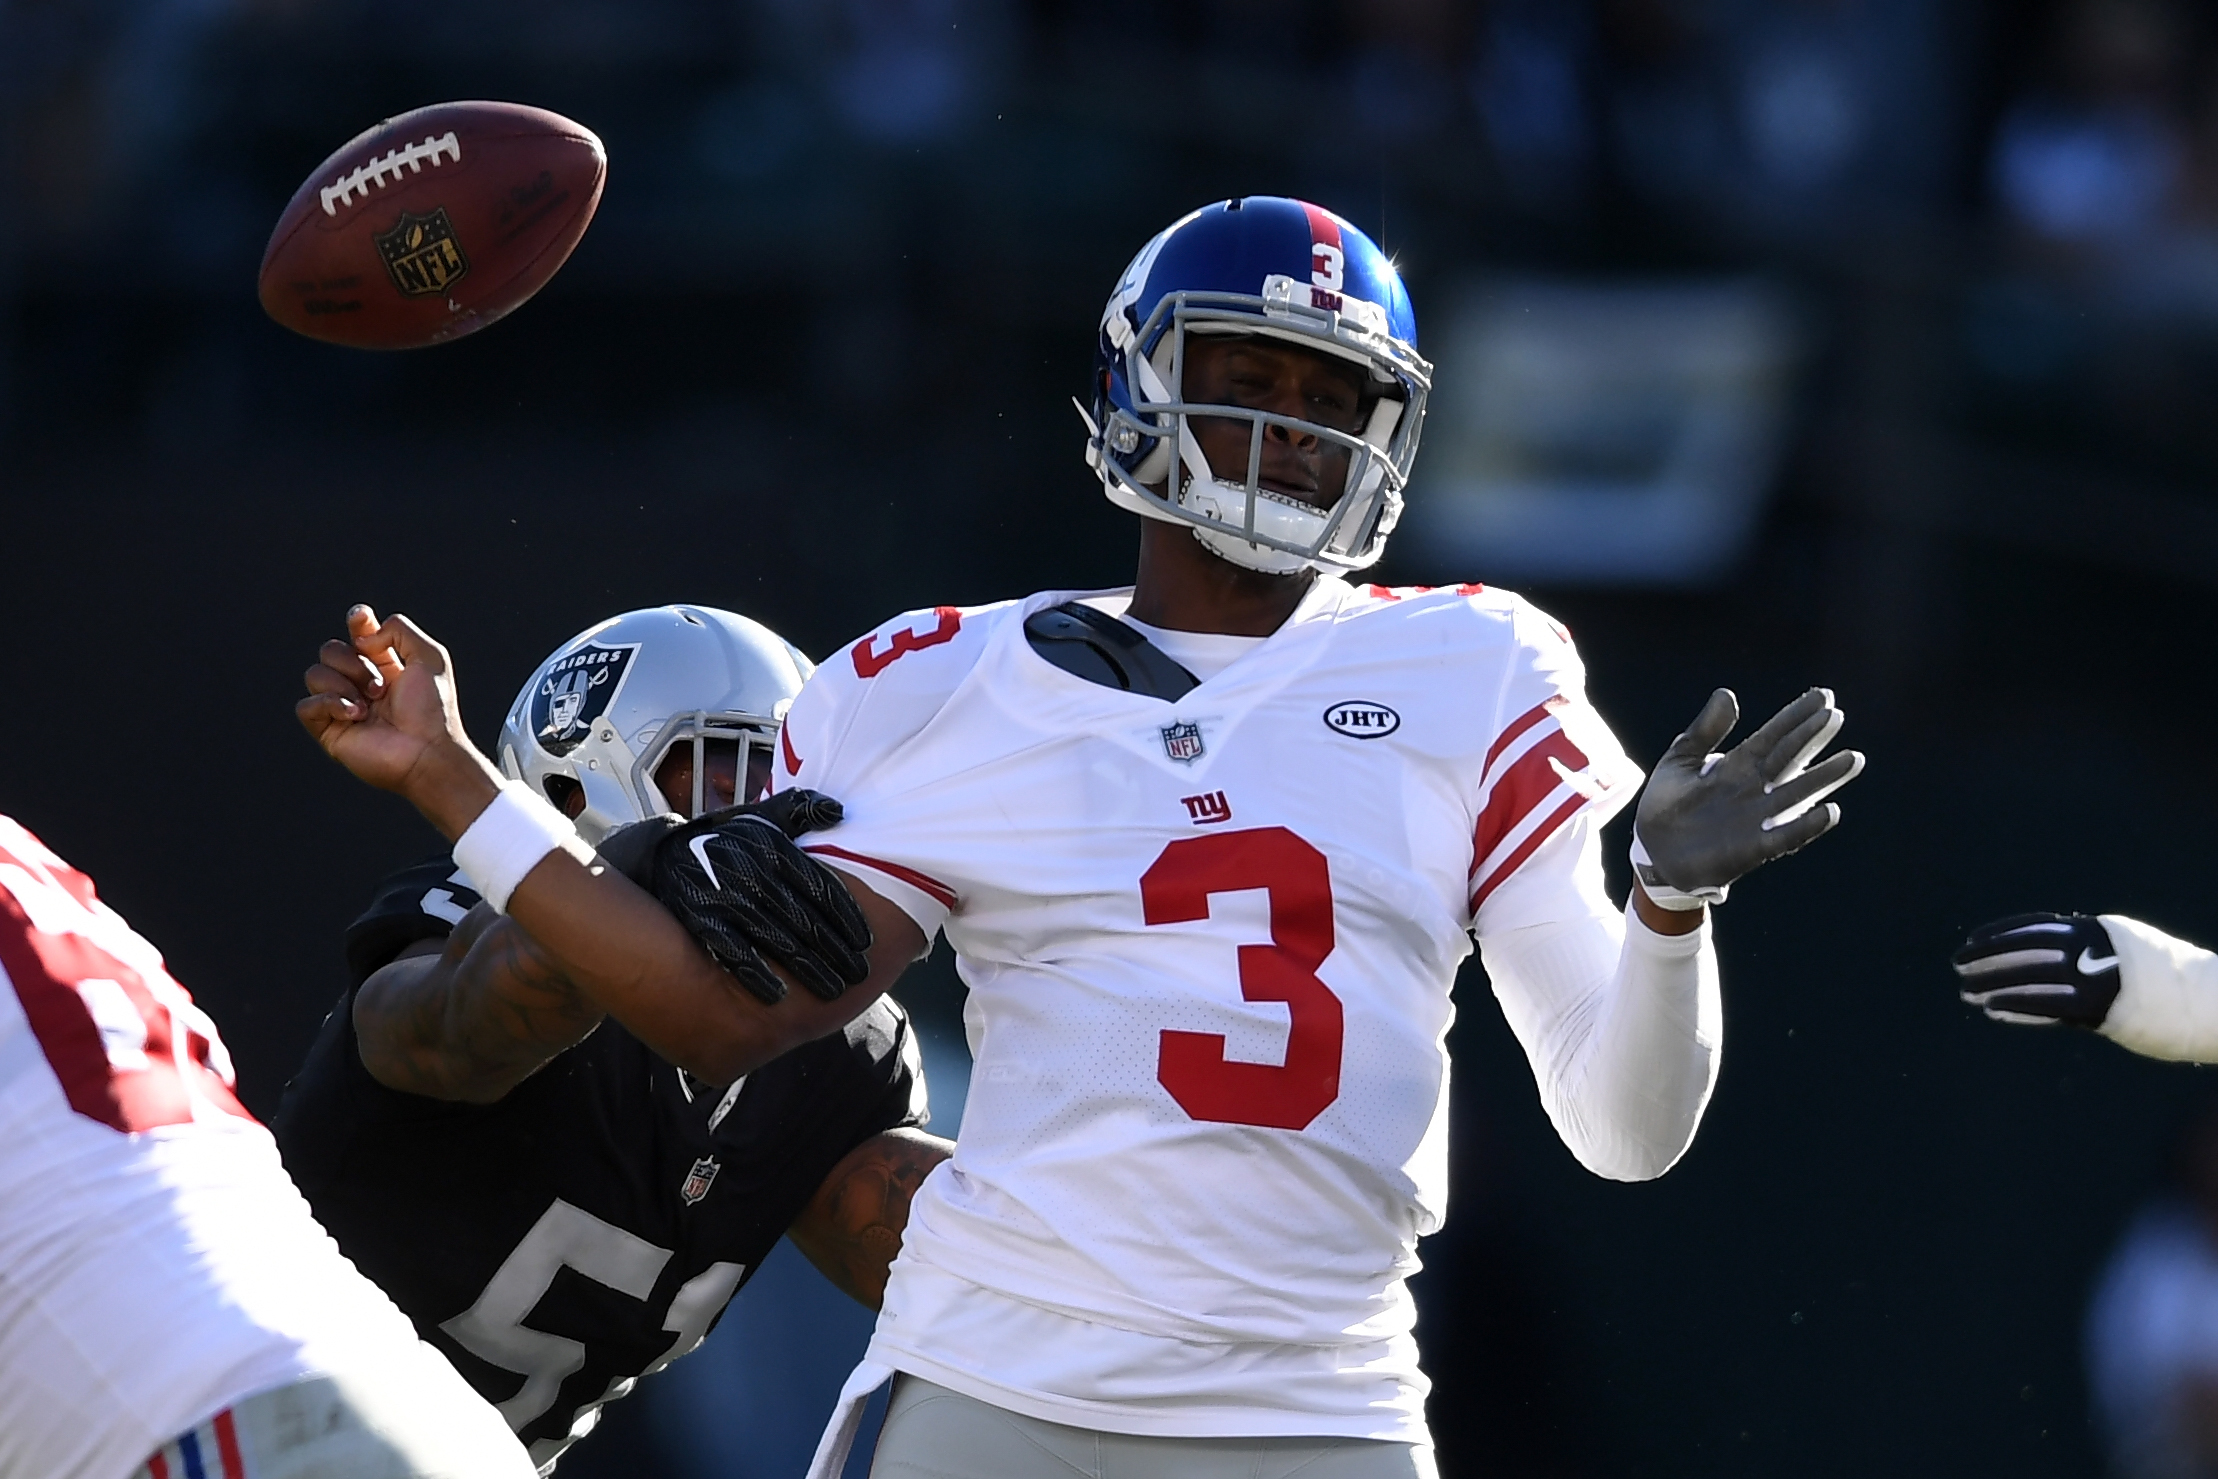 OAKLAND, CA - DECEMBER 03: Geno Smith #3 of the New York Giants is stripped of the ball by Bruce Irvin #51 of the Oakland Raiders during their NFL game at Oakland-Alameda County Coliseum on December 3, 2017 in Oakland, California. Thearon W. Henderson/Getty Images